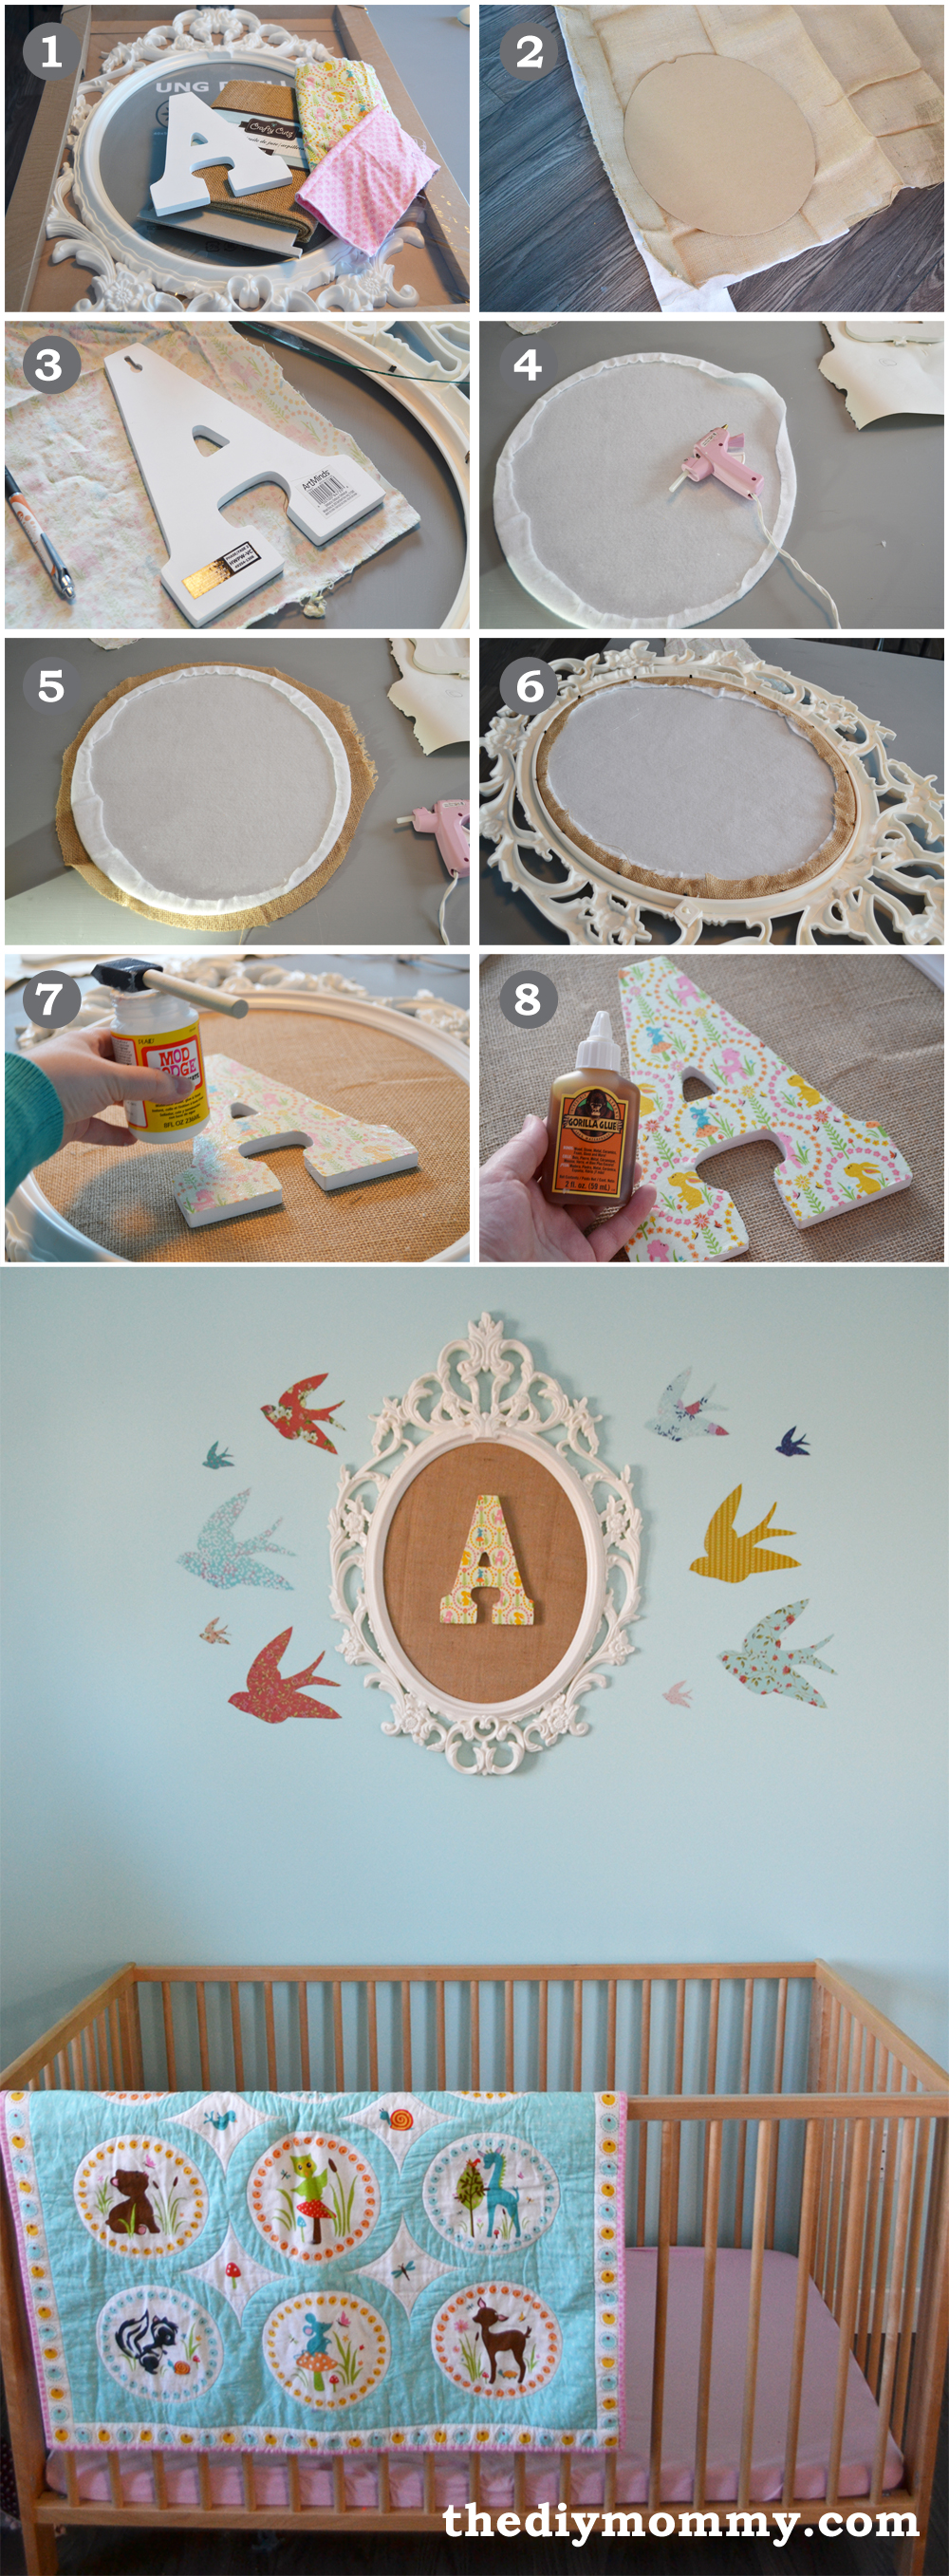 How to make DIY monogram wall art for a nursery or kid's room with burlap, and Ikea frame and scrap fabric.